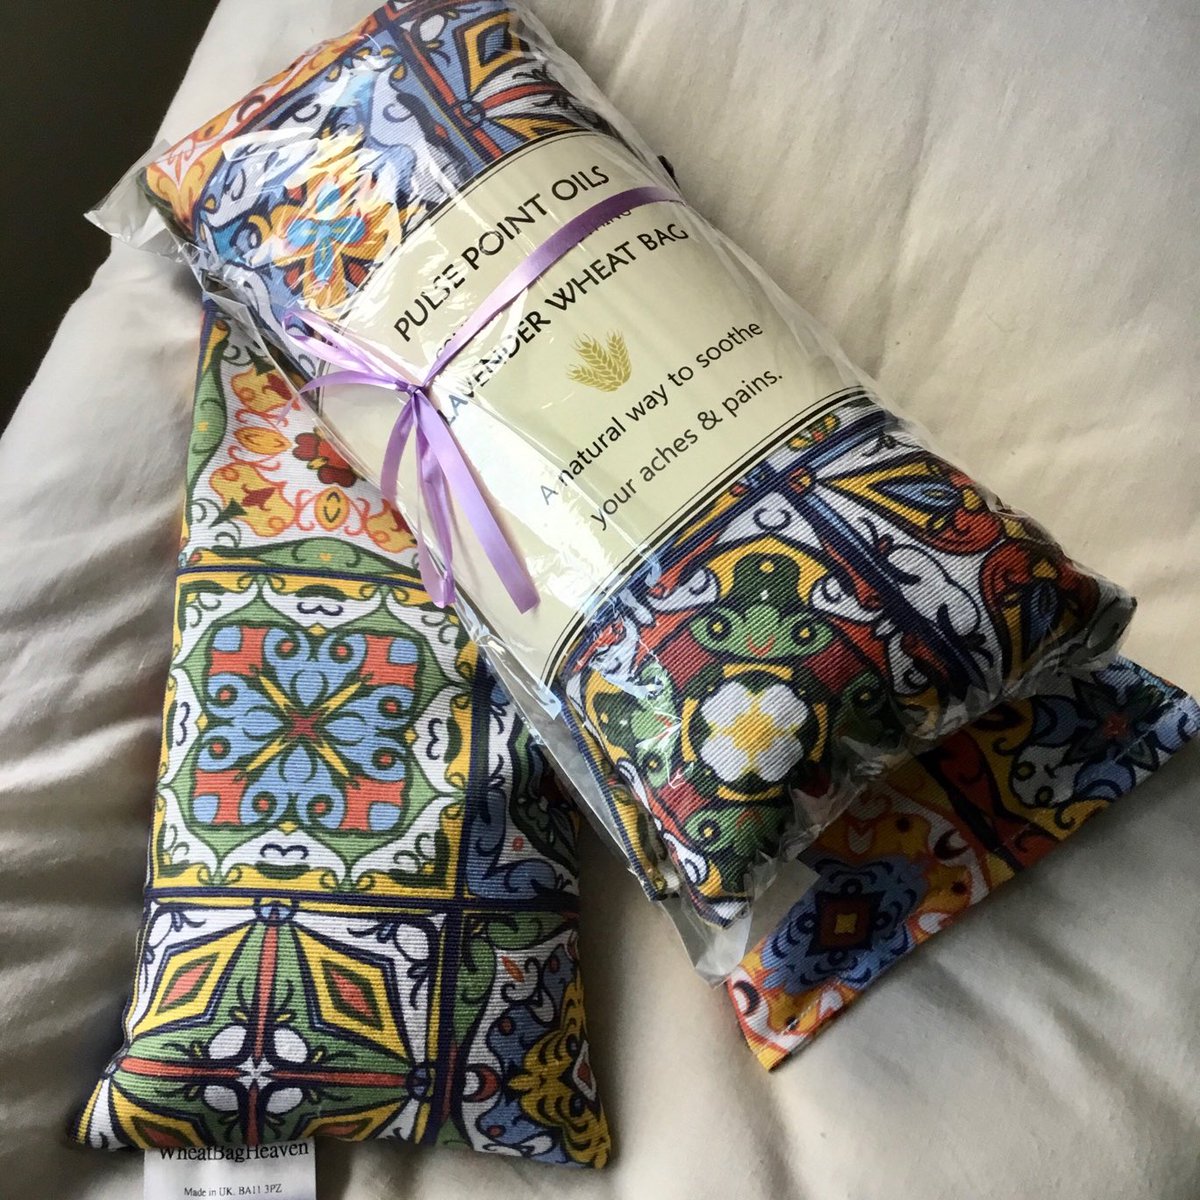 Wheat bags for natural pain relief and wellbeing. Warming and comforting with aromatic lavender to soothe and calm and aid restful slumber. etsy.me/35HC65h
#forthehardtobuyfor #restfulslumber #TimeForChange #ecofriendly #ecoliving #weekendvibes #shopsmallbusiness #hmuk